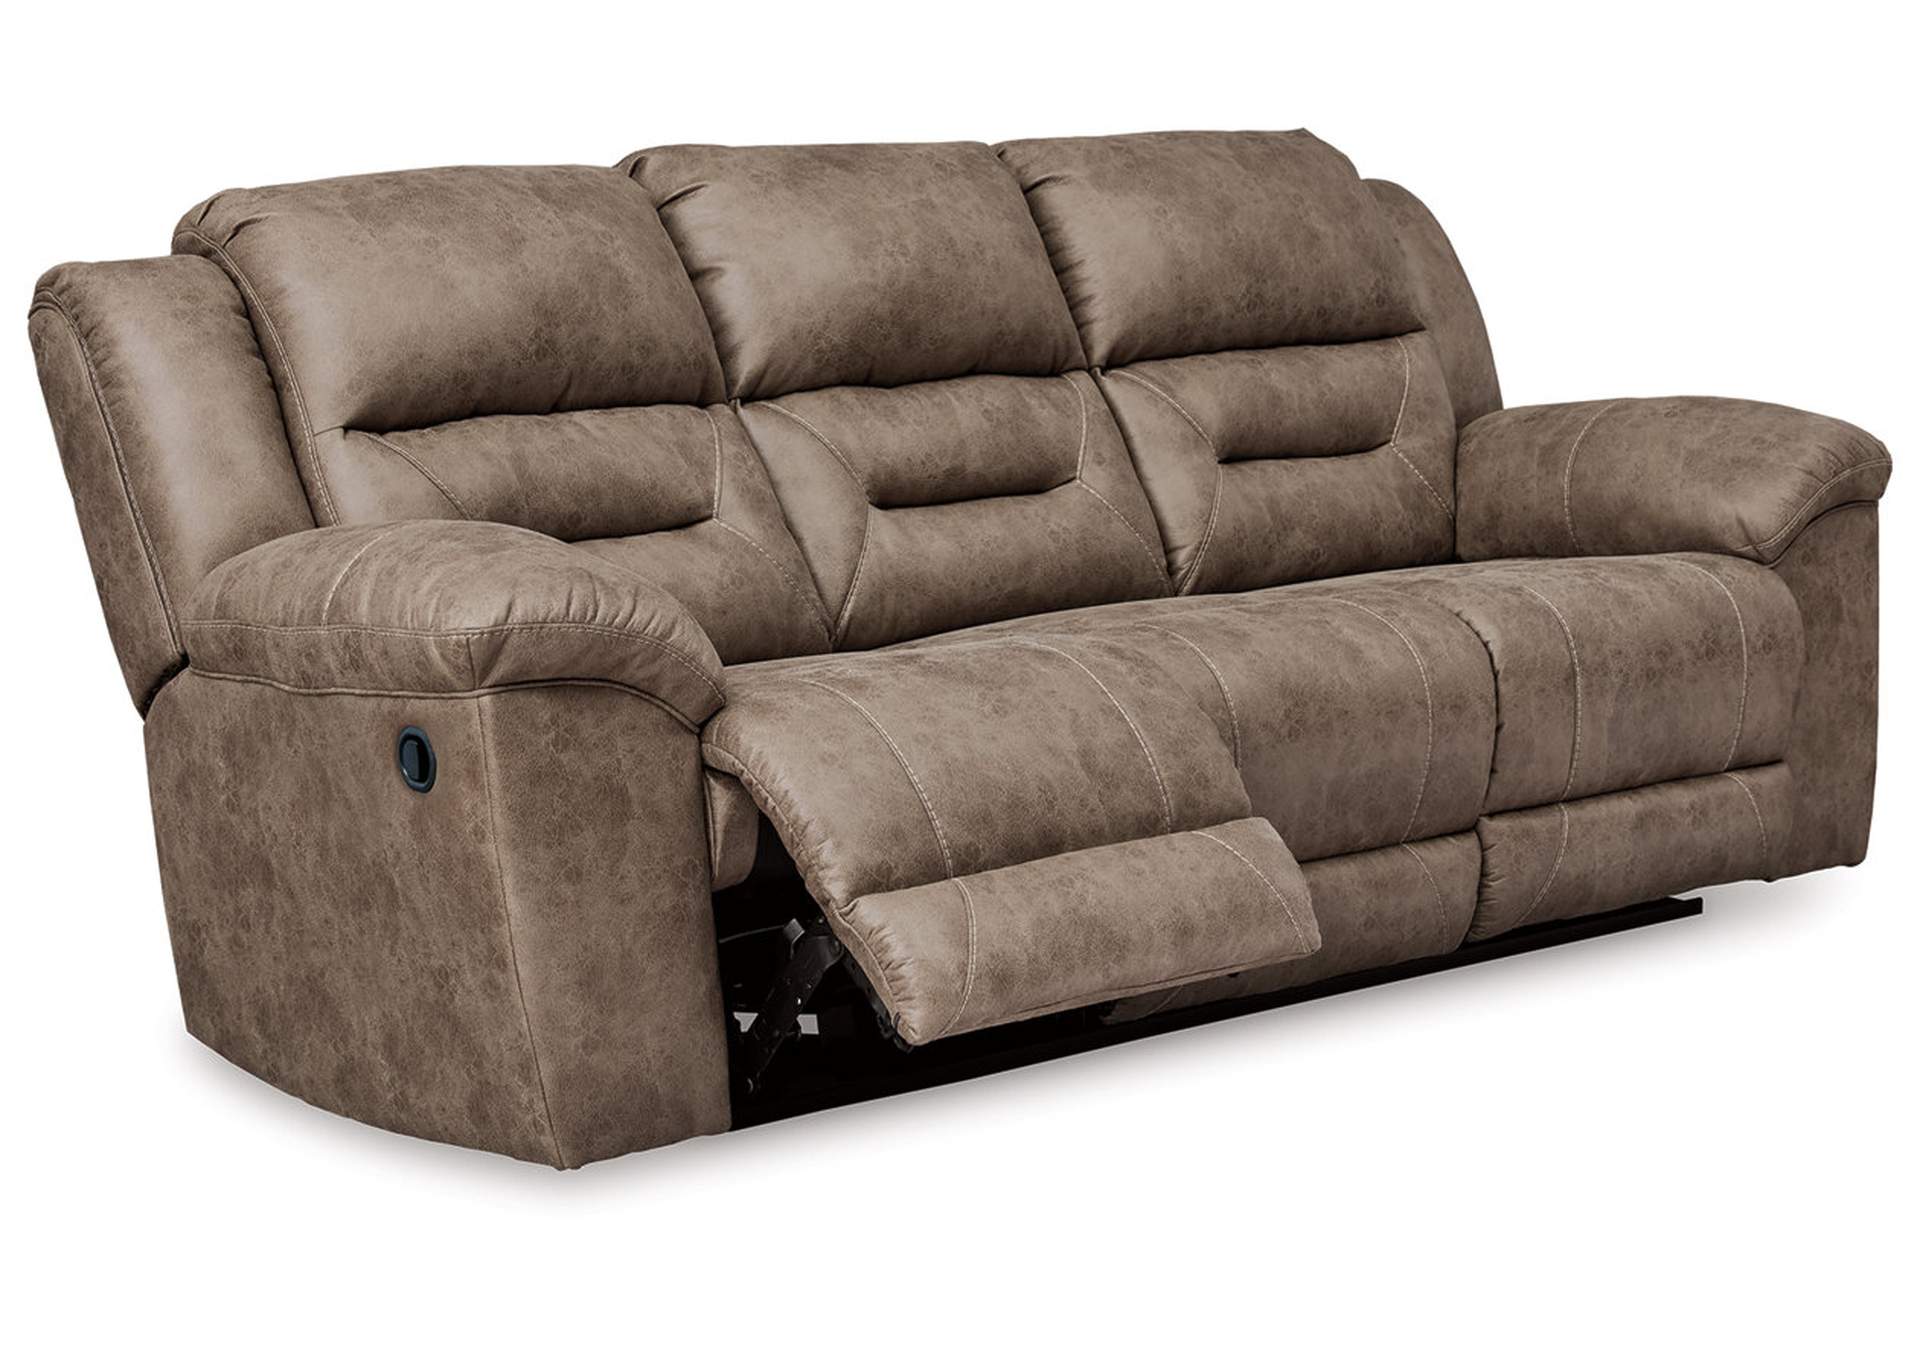 Stoneland Reclining Sofa, Loveseat and Recliner,Signature Design By Ashley